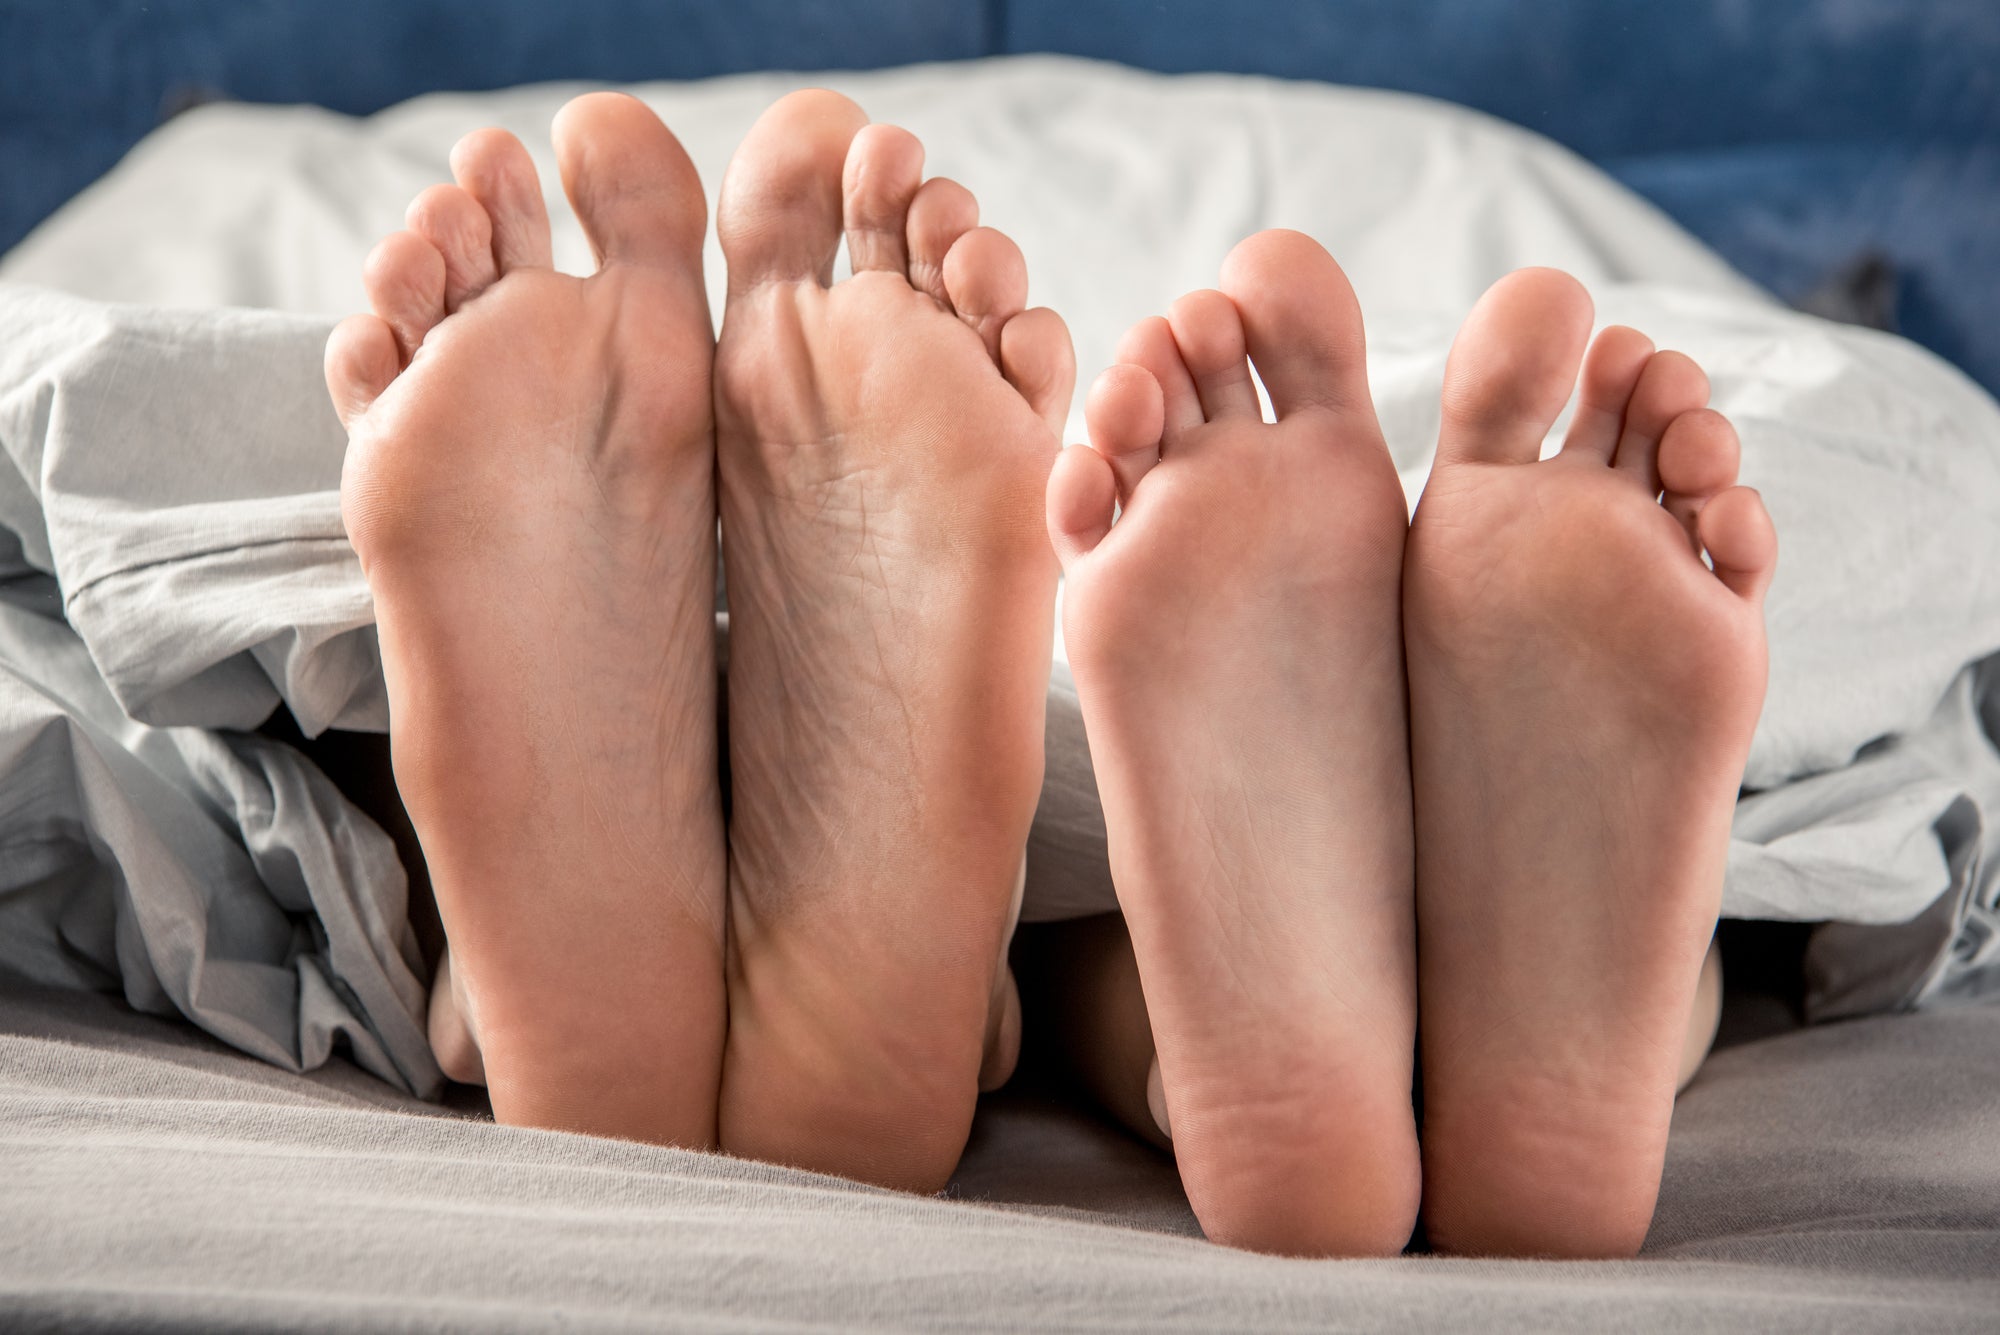 Proper Foot Care For Runners: What You Need To Know